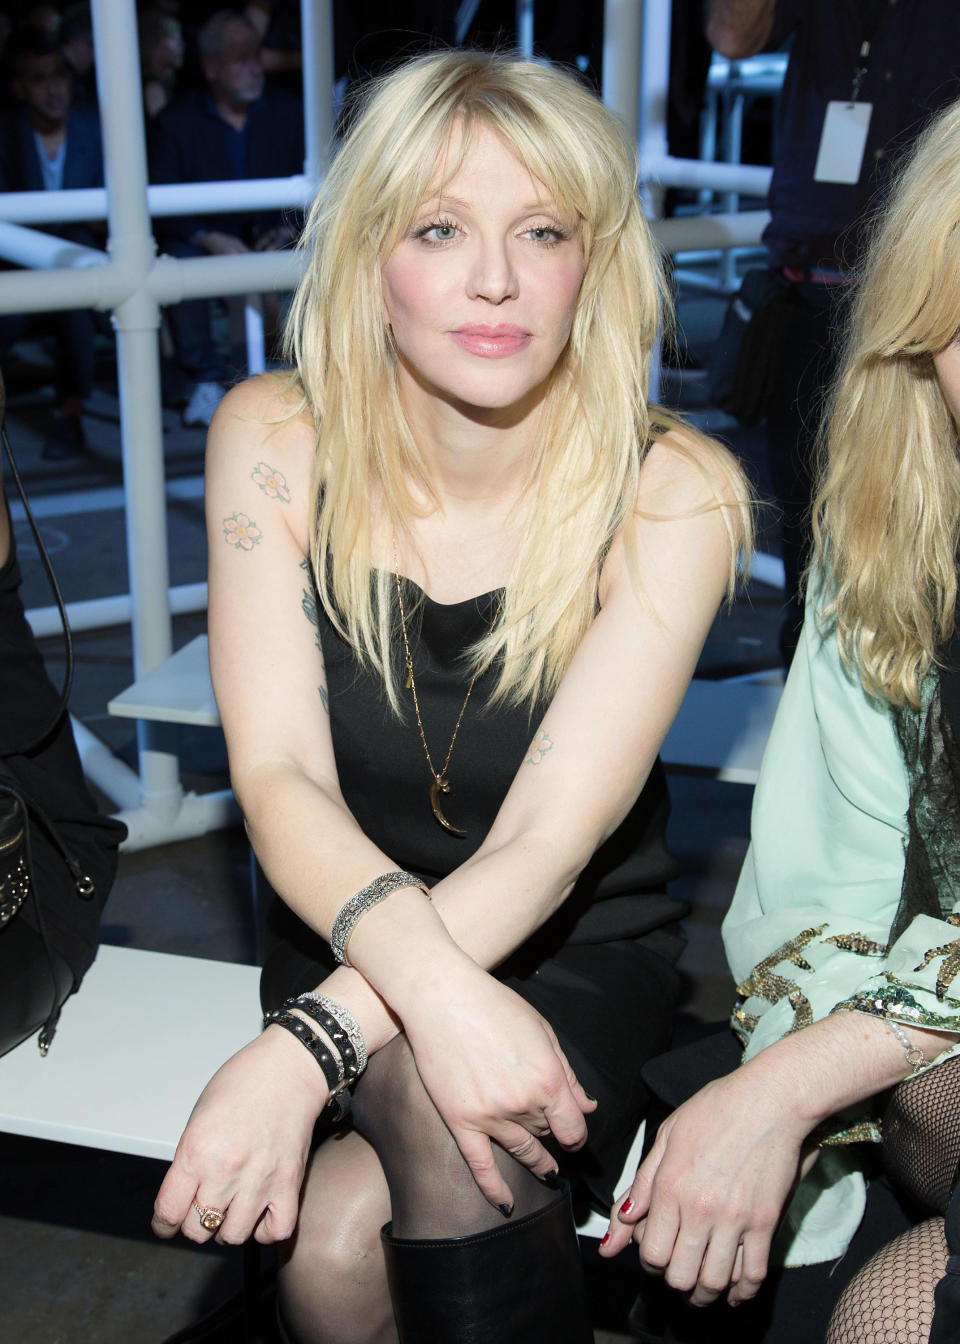 Courtney Love attends the Alexander Wang collection on Saturday, Sept. 7, 2012, during Mercedes-Benz Fashion Week in New York. (Photo by Dario Cantatore/Invision/AP)